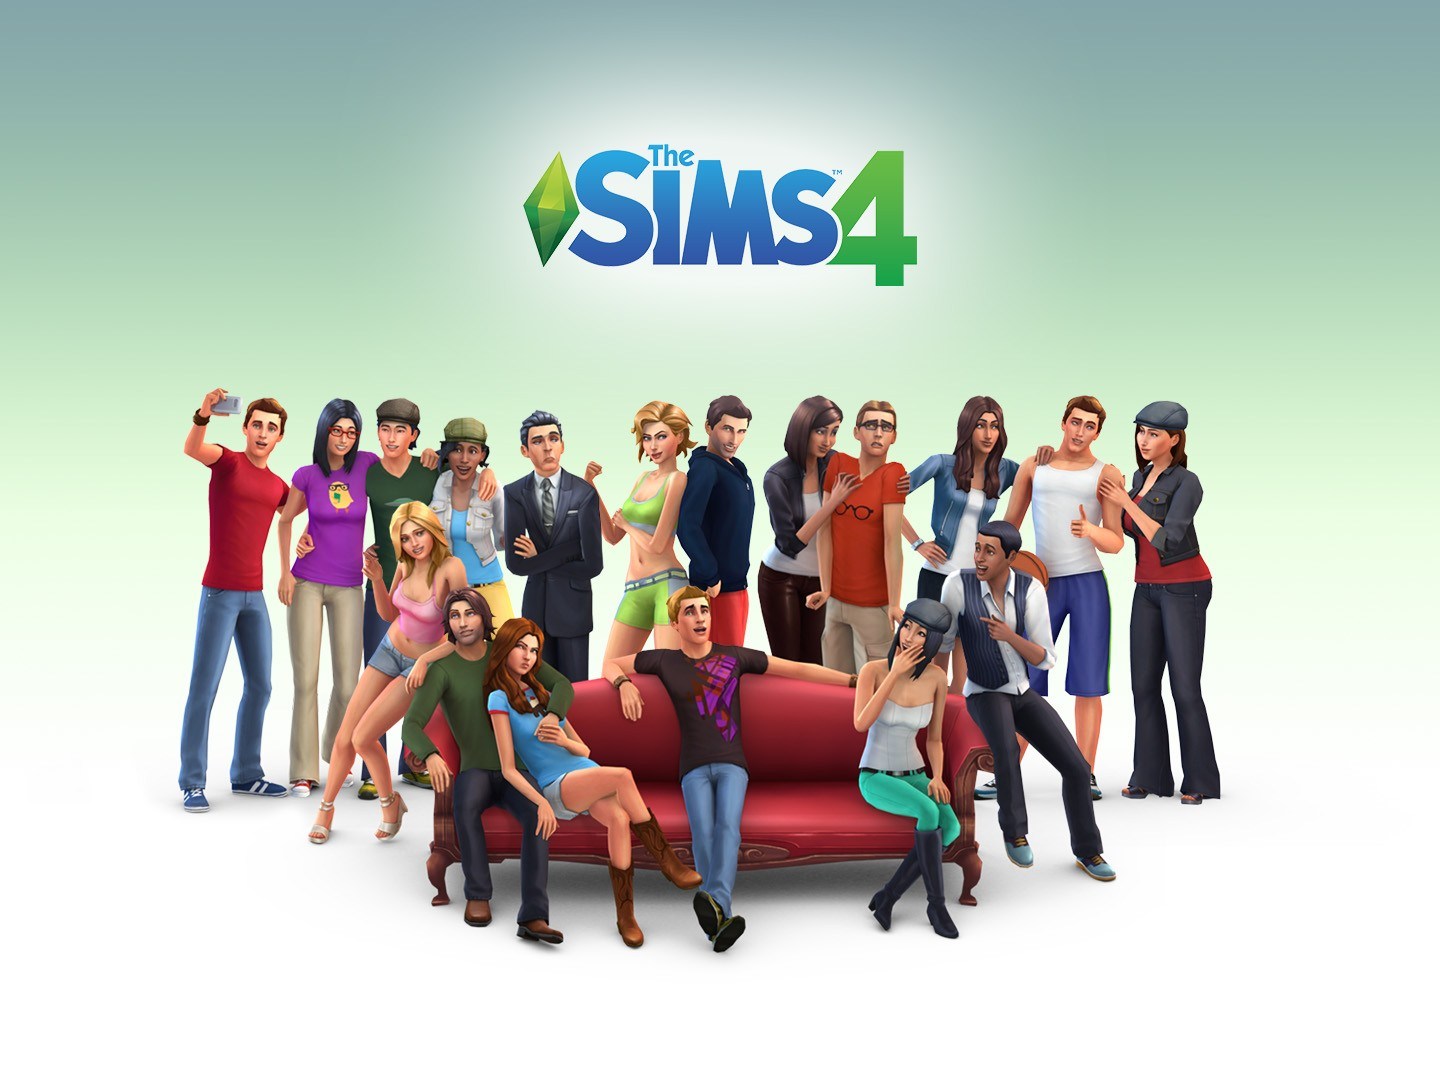 The sims 4 free download for pc